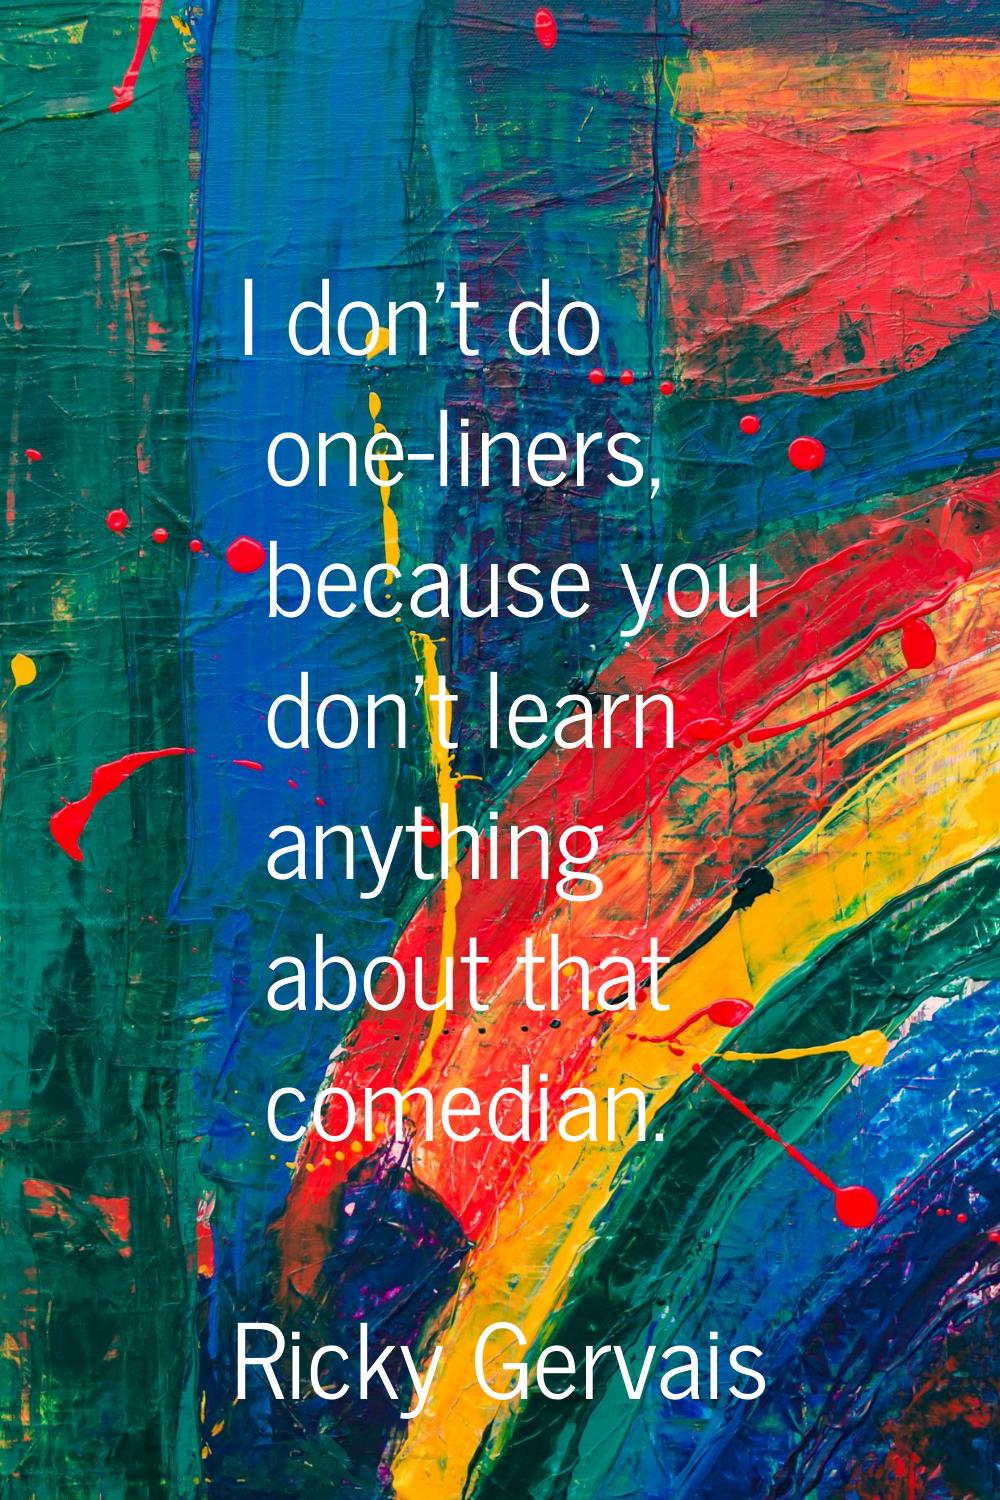 I don't do one-liners, because you don't learn anything about that comedian.